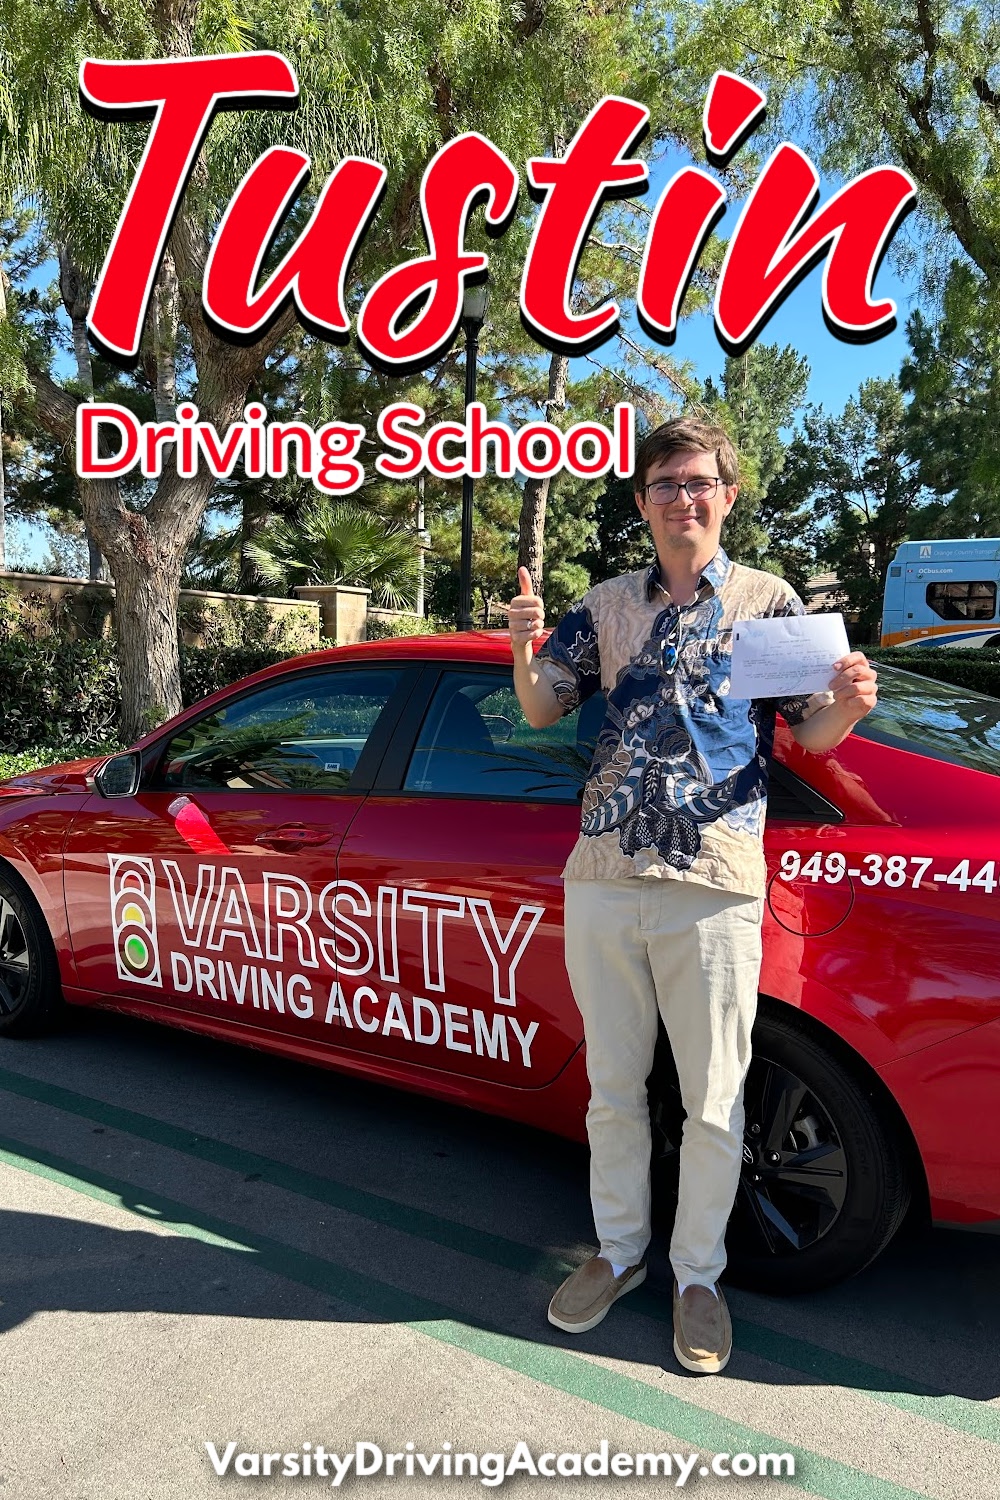 Welcome to Varsity Driving Academy, your #1 rated Tustin Driving School.